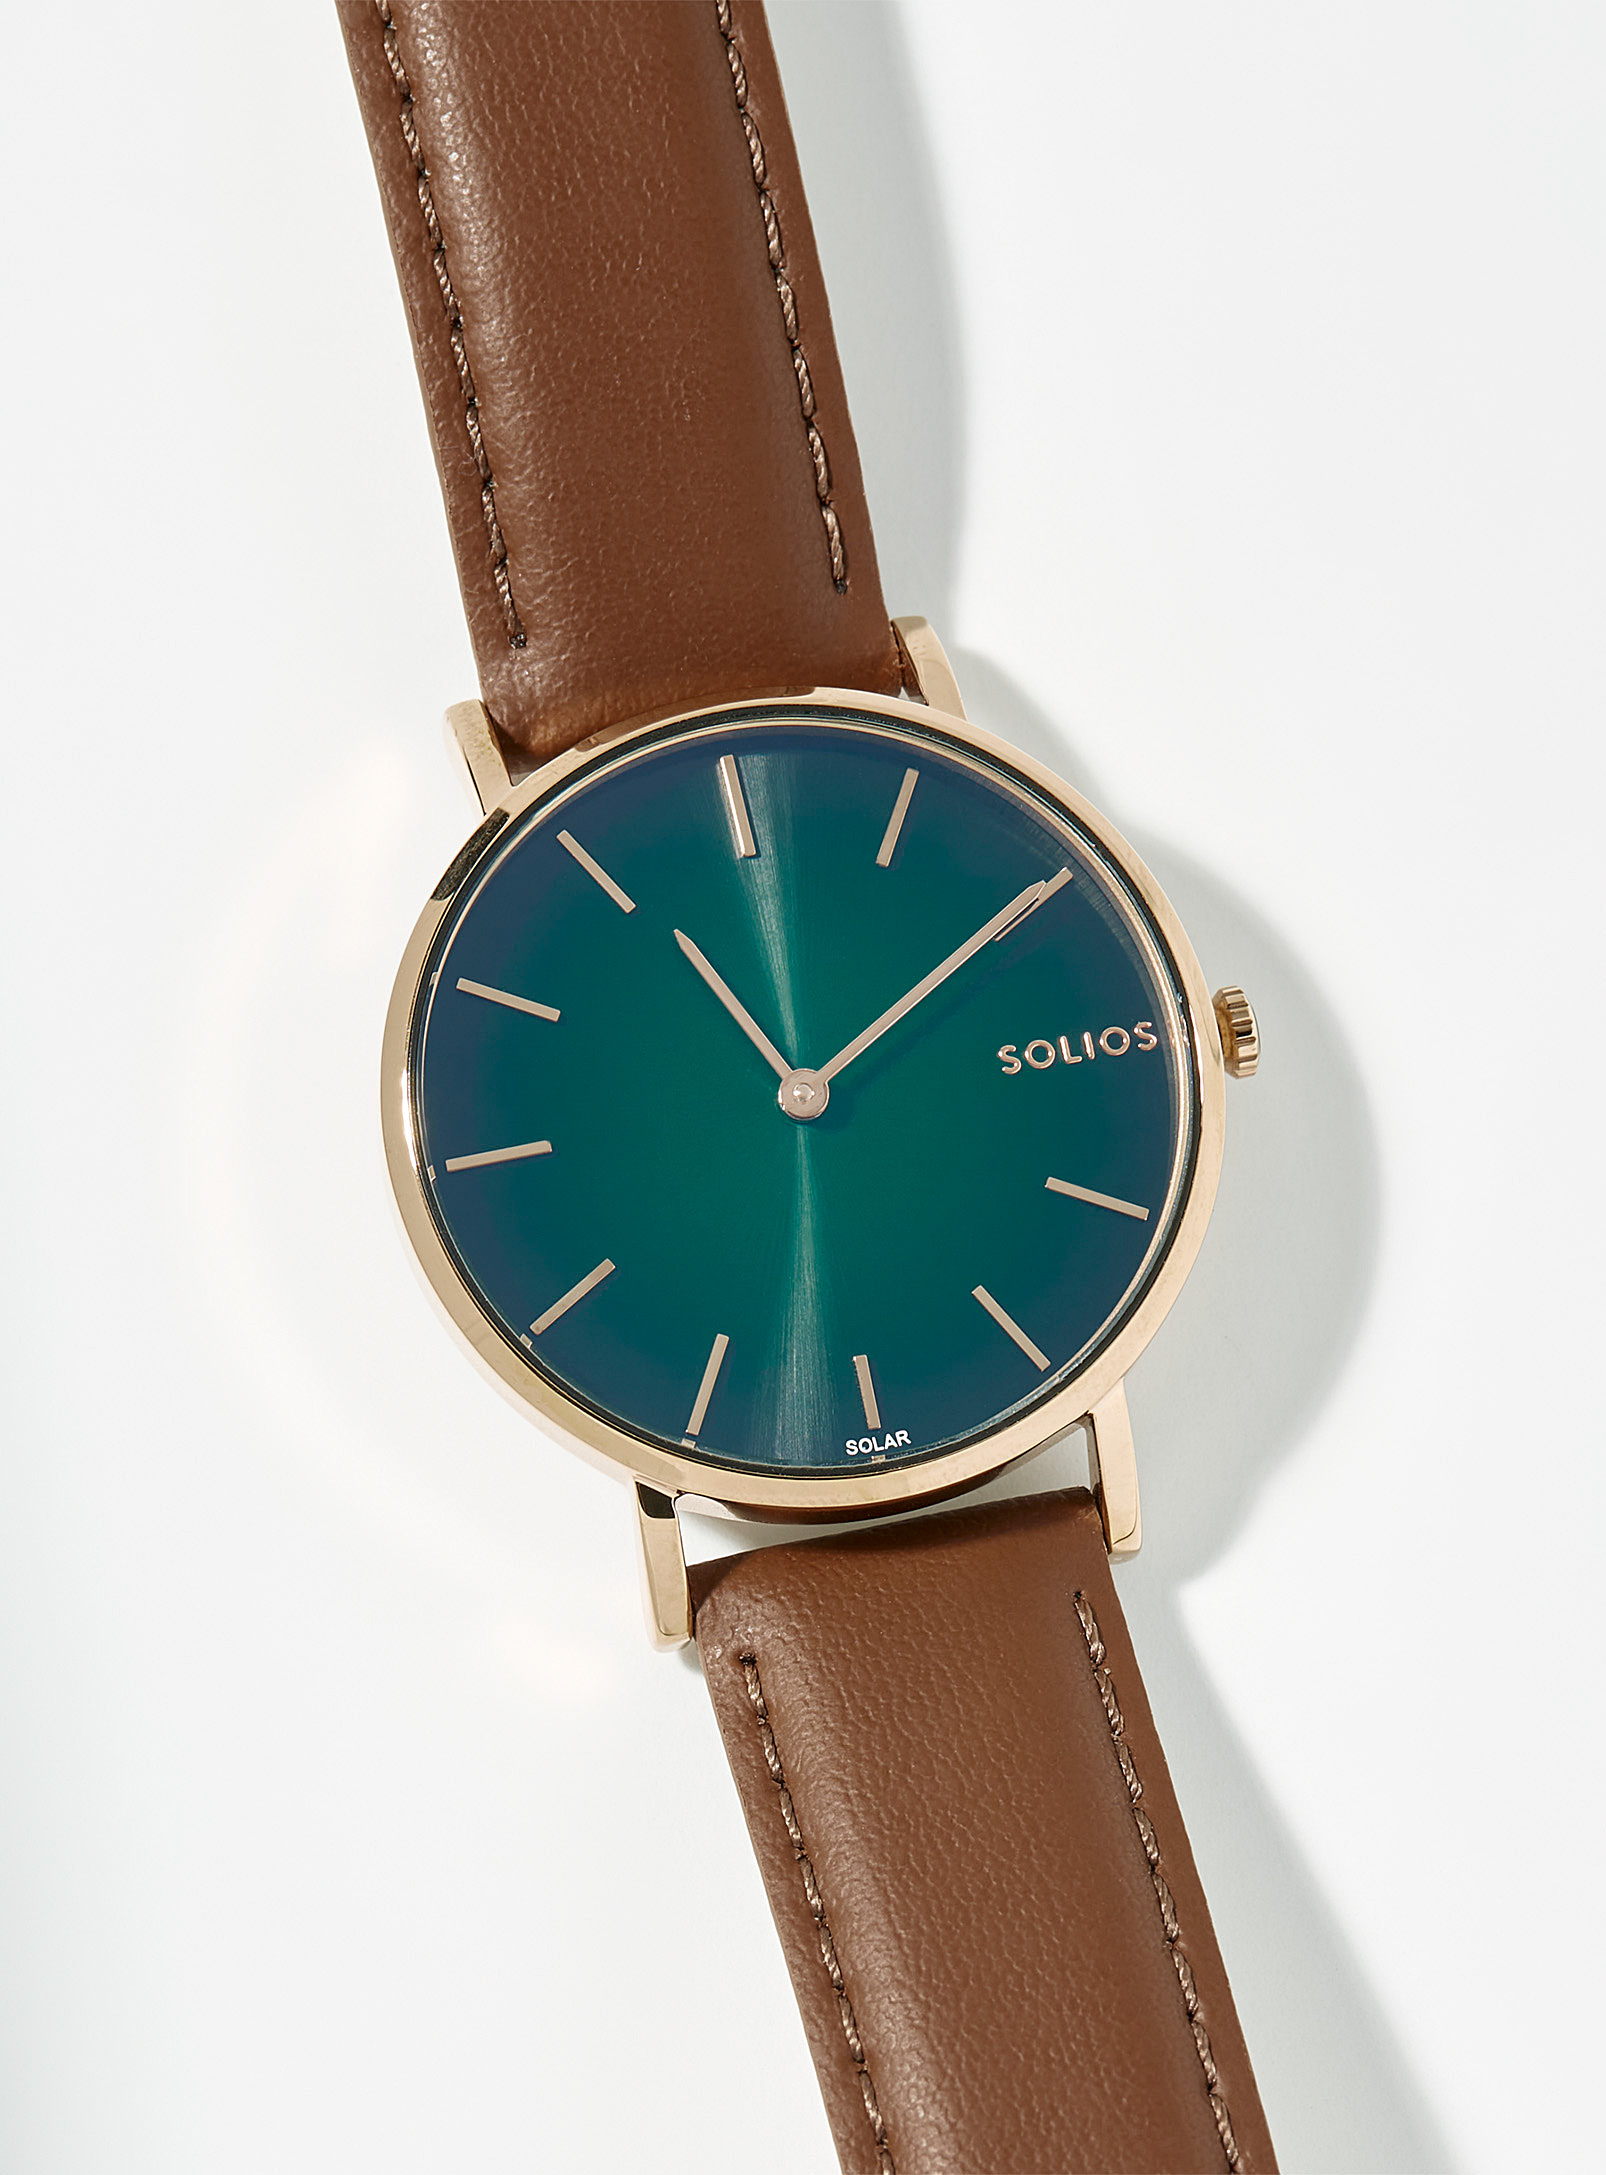 Solios Graded Face Rainforest Watch In Blue